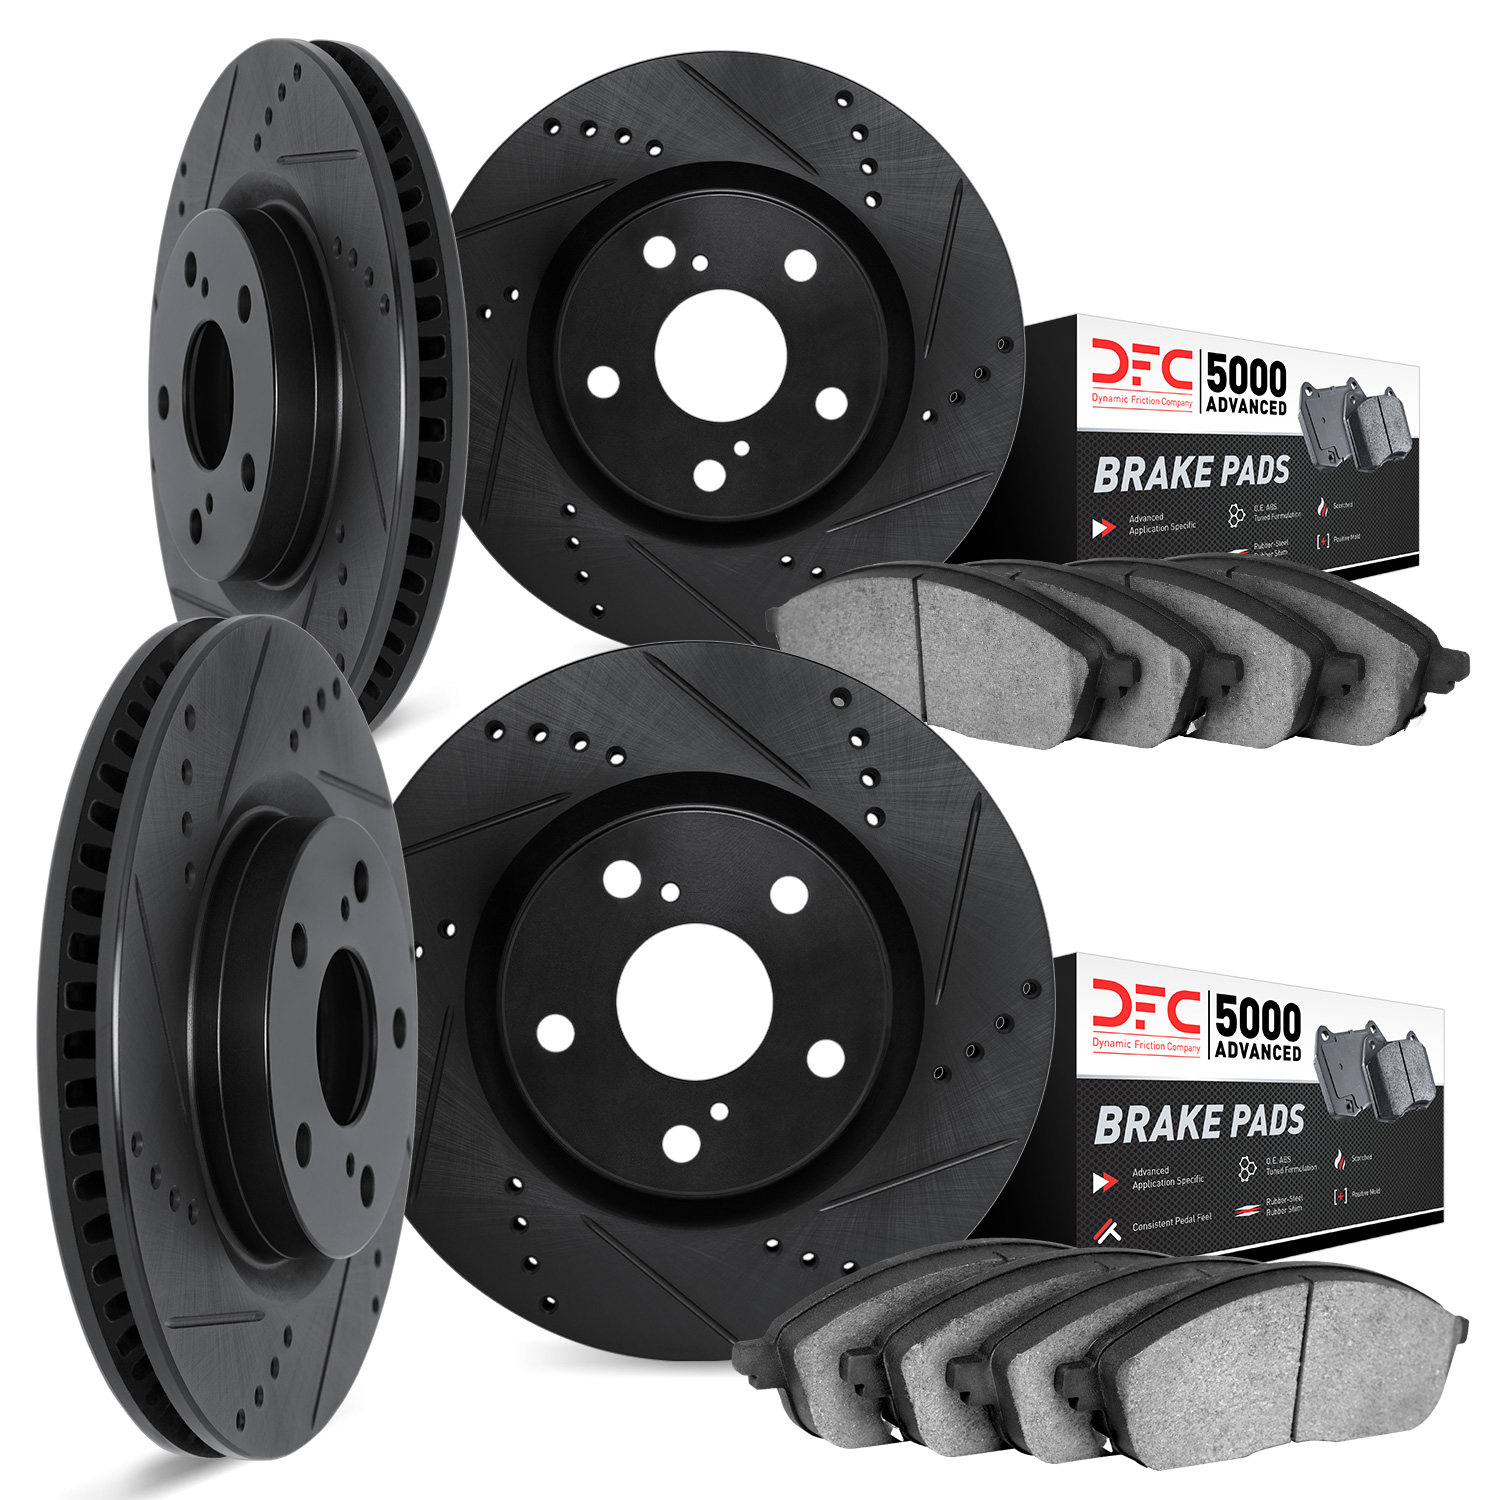 8504-31014 Drilled/Slotted Brake Rotors w/5000 Advanced Brake Pads Kit [Black], 2004-2007 BMW, Position: Front and Rear